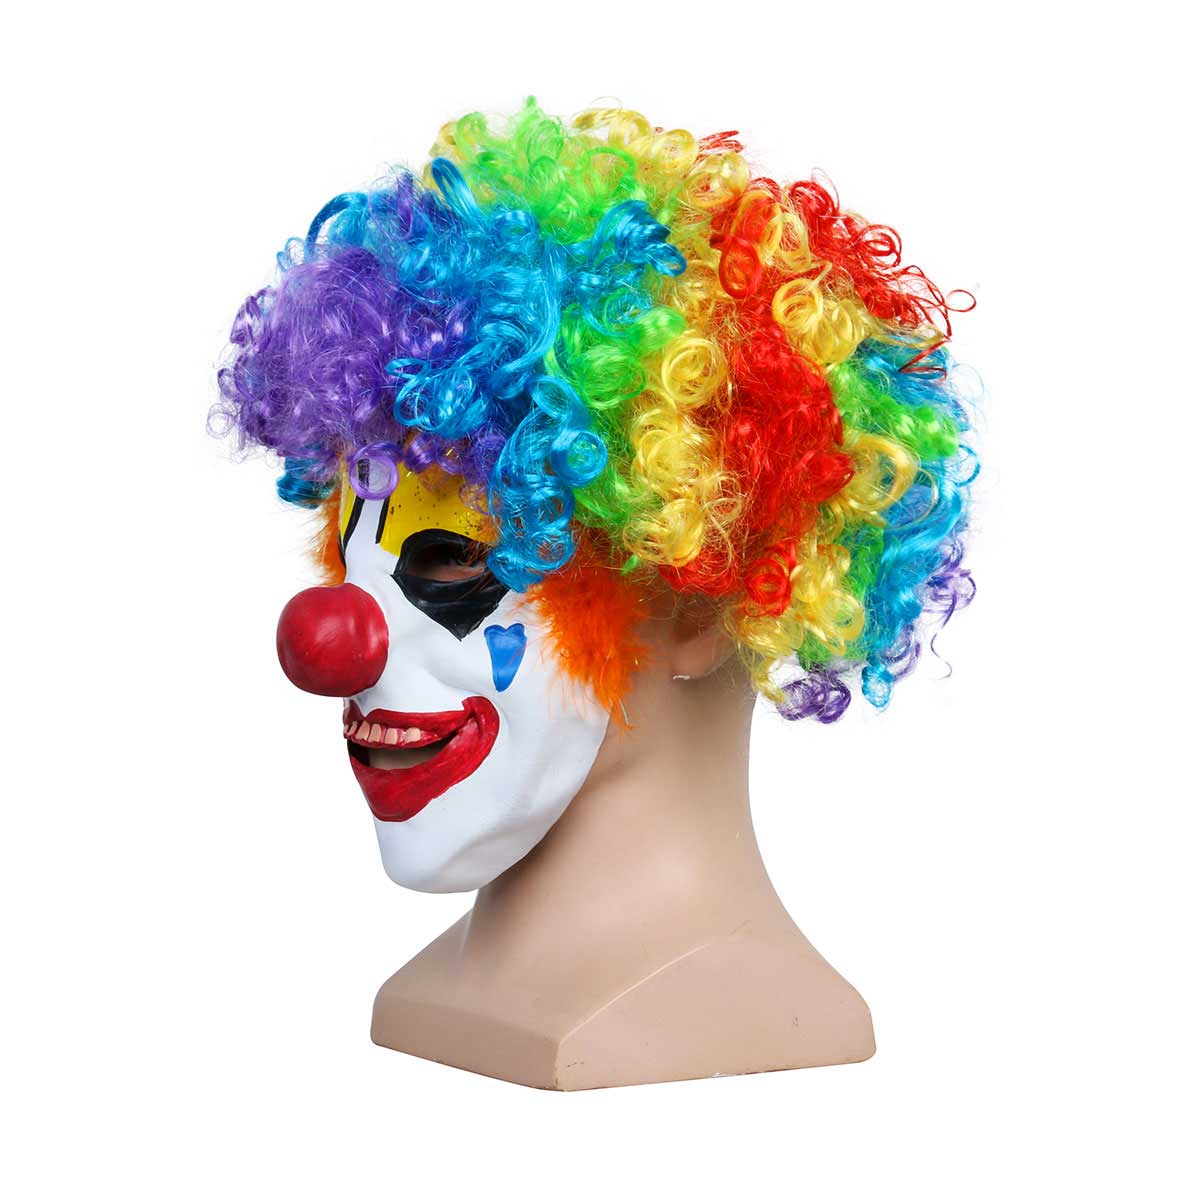 Clown Mask With Colorful Clown Wig